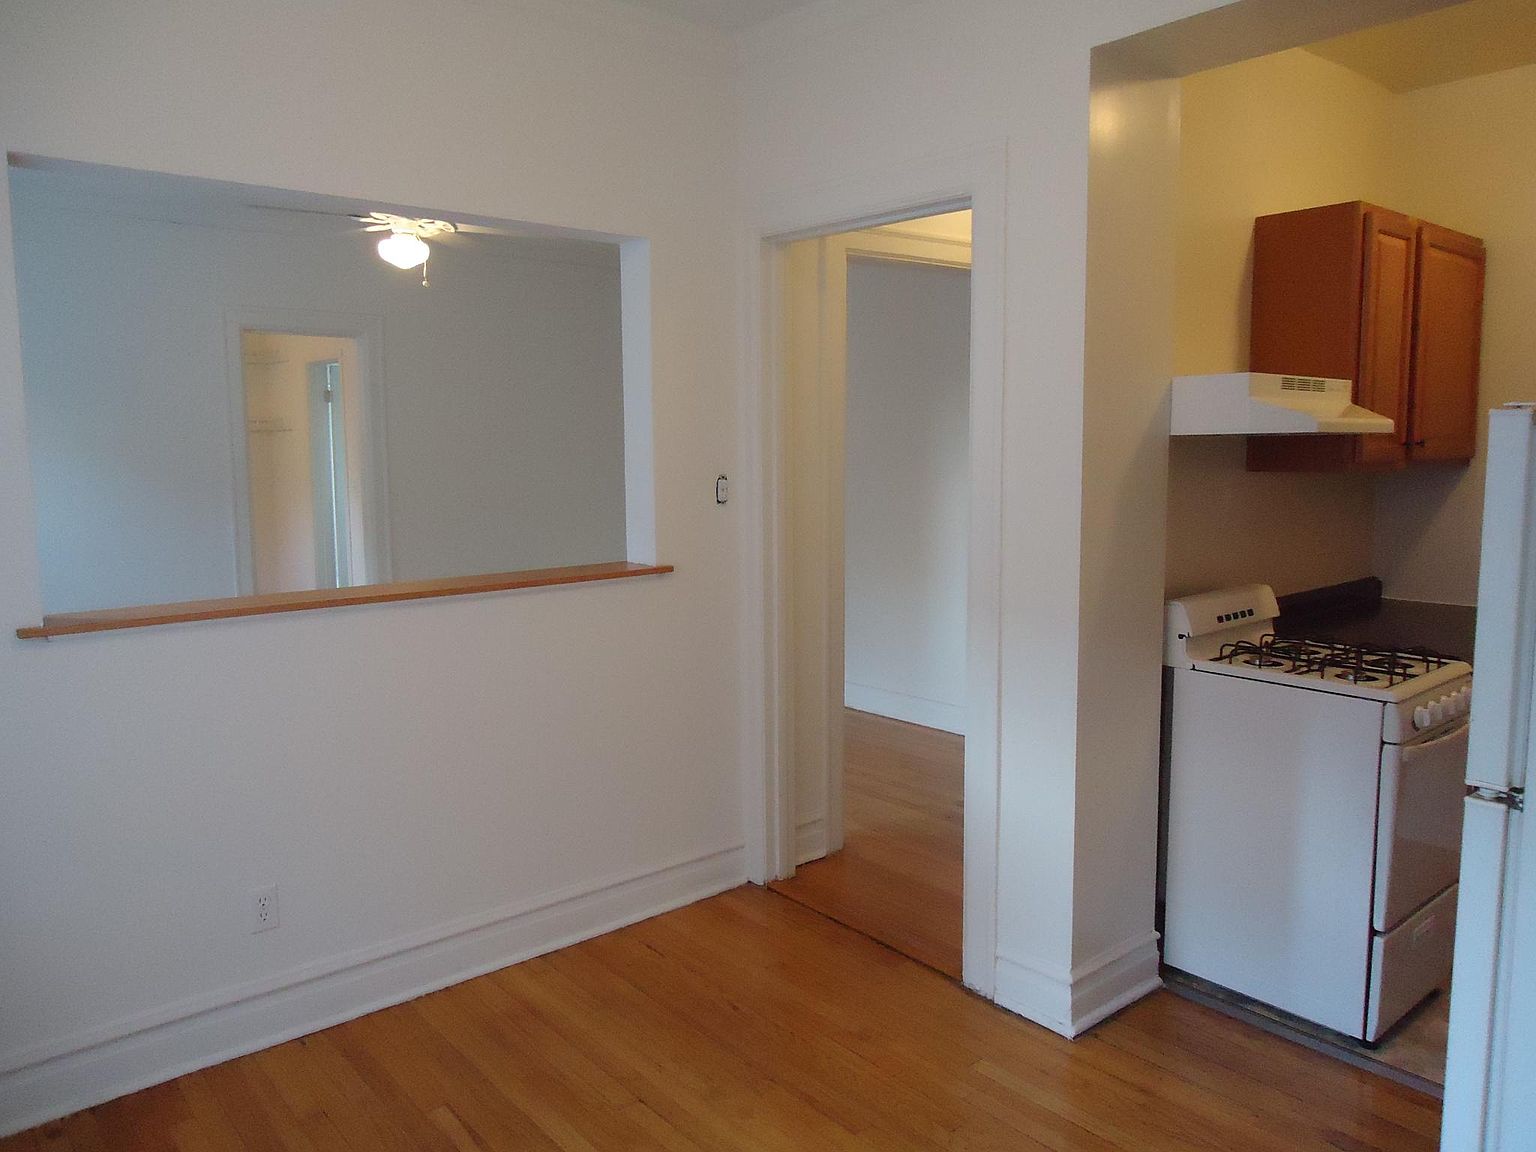 5634 N Kenmore Ave APT 102, Chicago, IL 60660